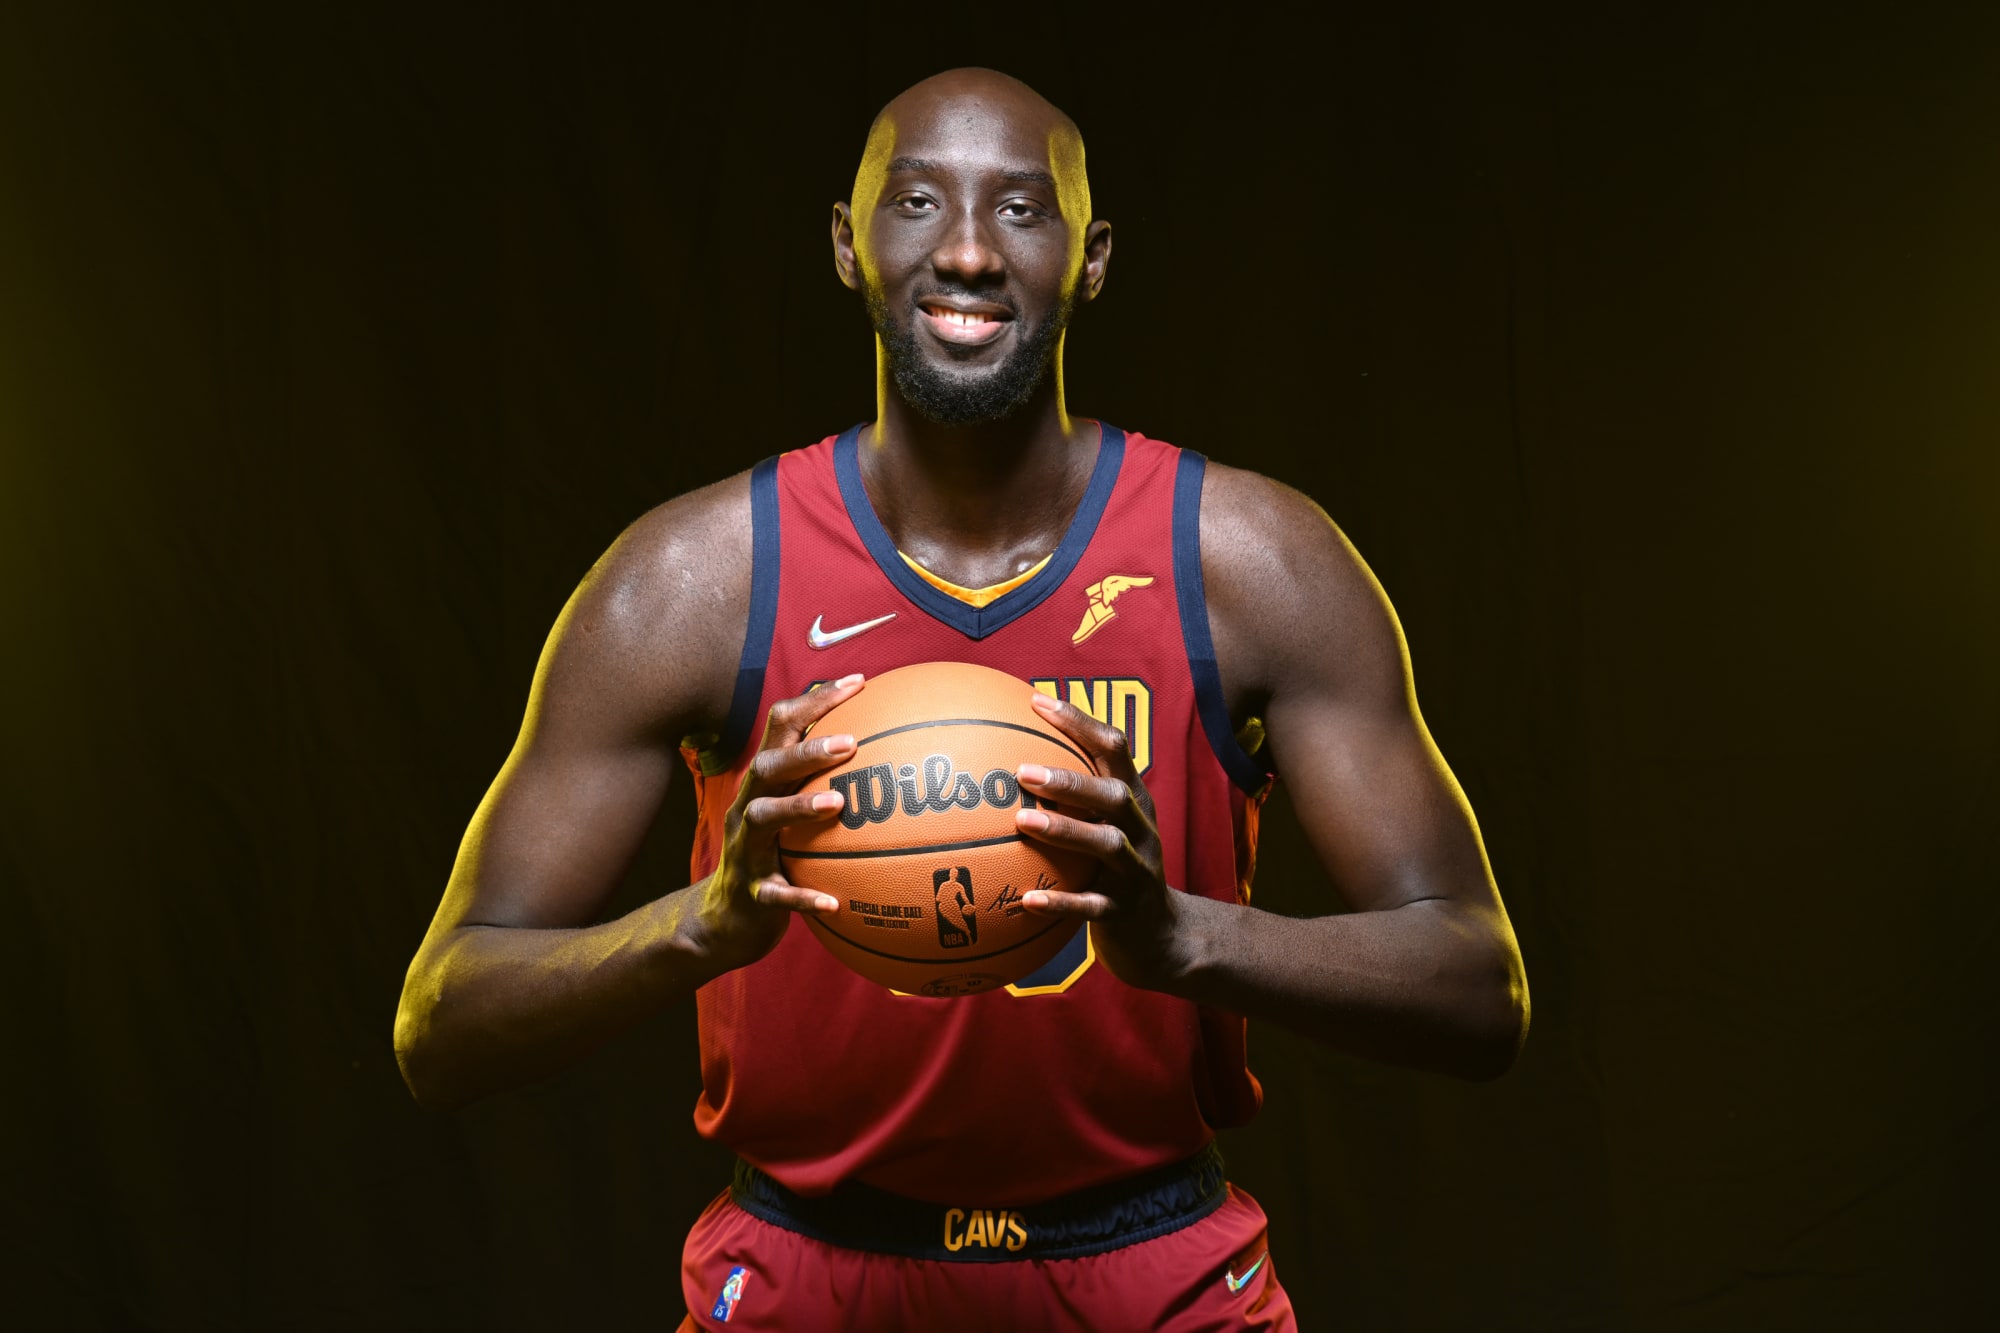 Cavs Nation on X: Tacko Fall brings his towering 7'5” frame to